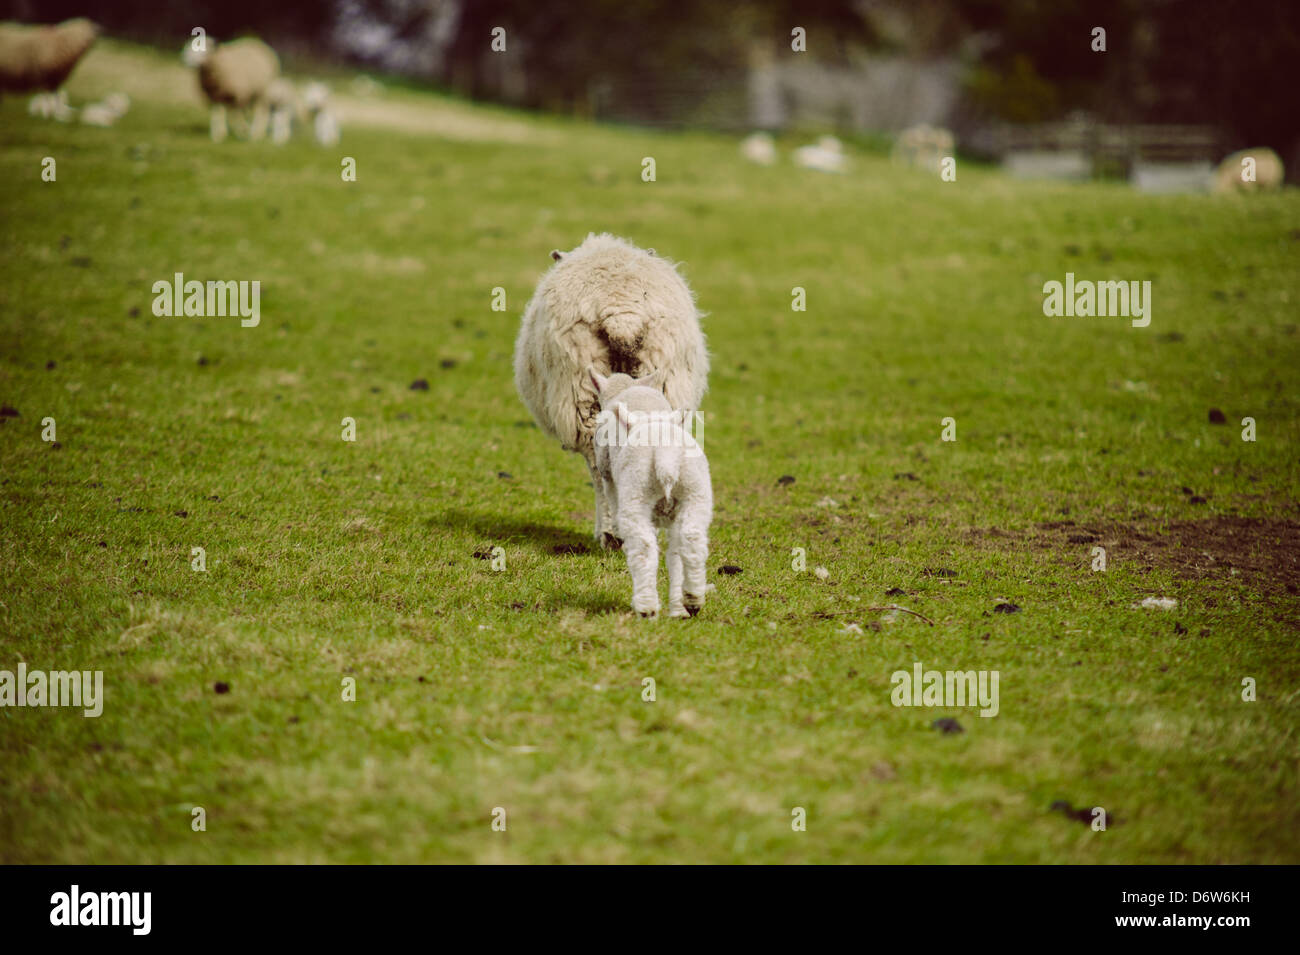 Two young spring lambs follow their mother in a field Stock Photo